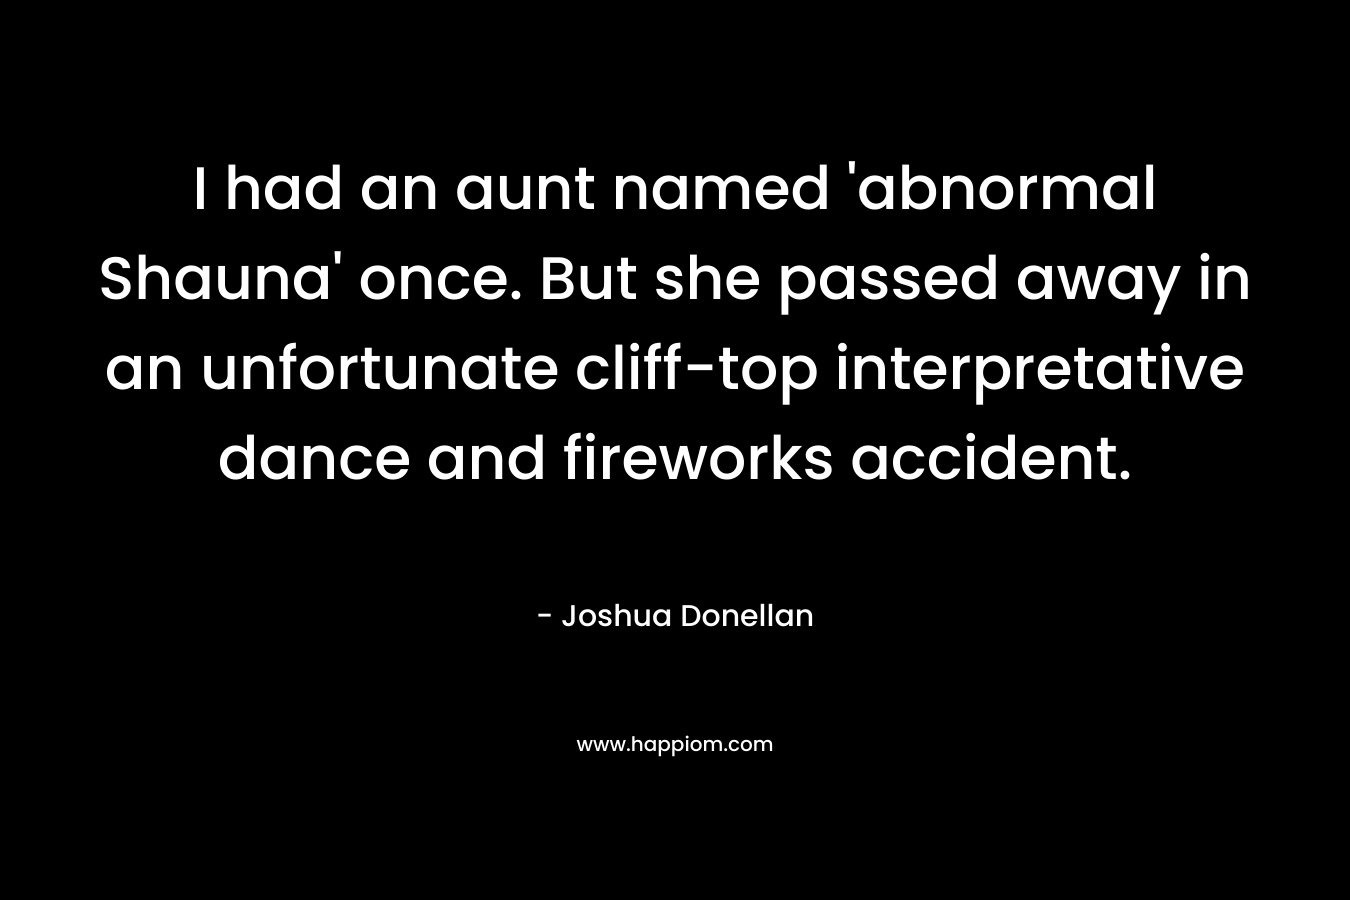 I had an aunt named ‘abnormal Shauna’ once. But she passed away in an unfortunate cliff-top interpretative dance and fireworks accident. – Joshua Donellan